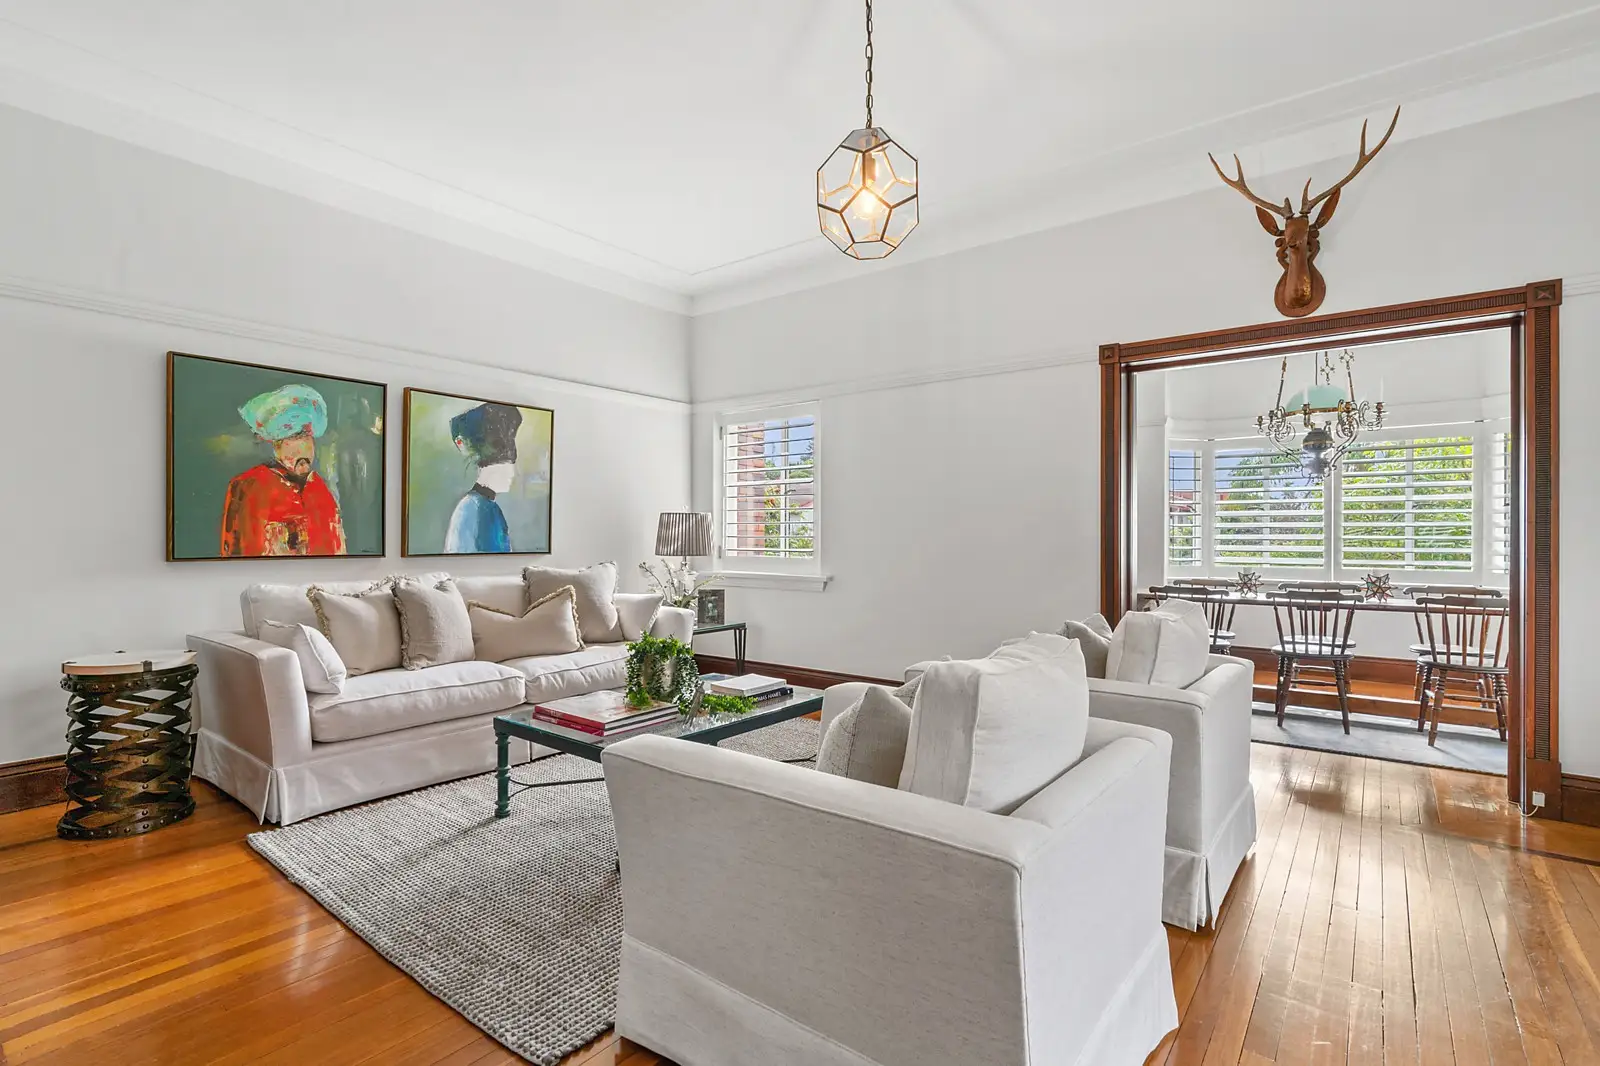 Photo #1: 3/21 William Street, Double Bay - Sold by Sydney Sotheby's International Realty